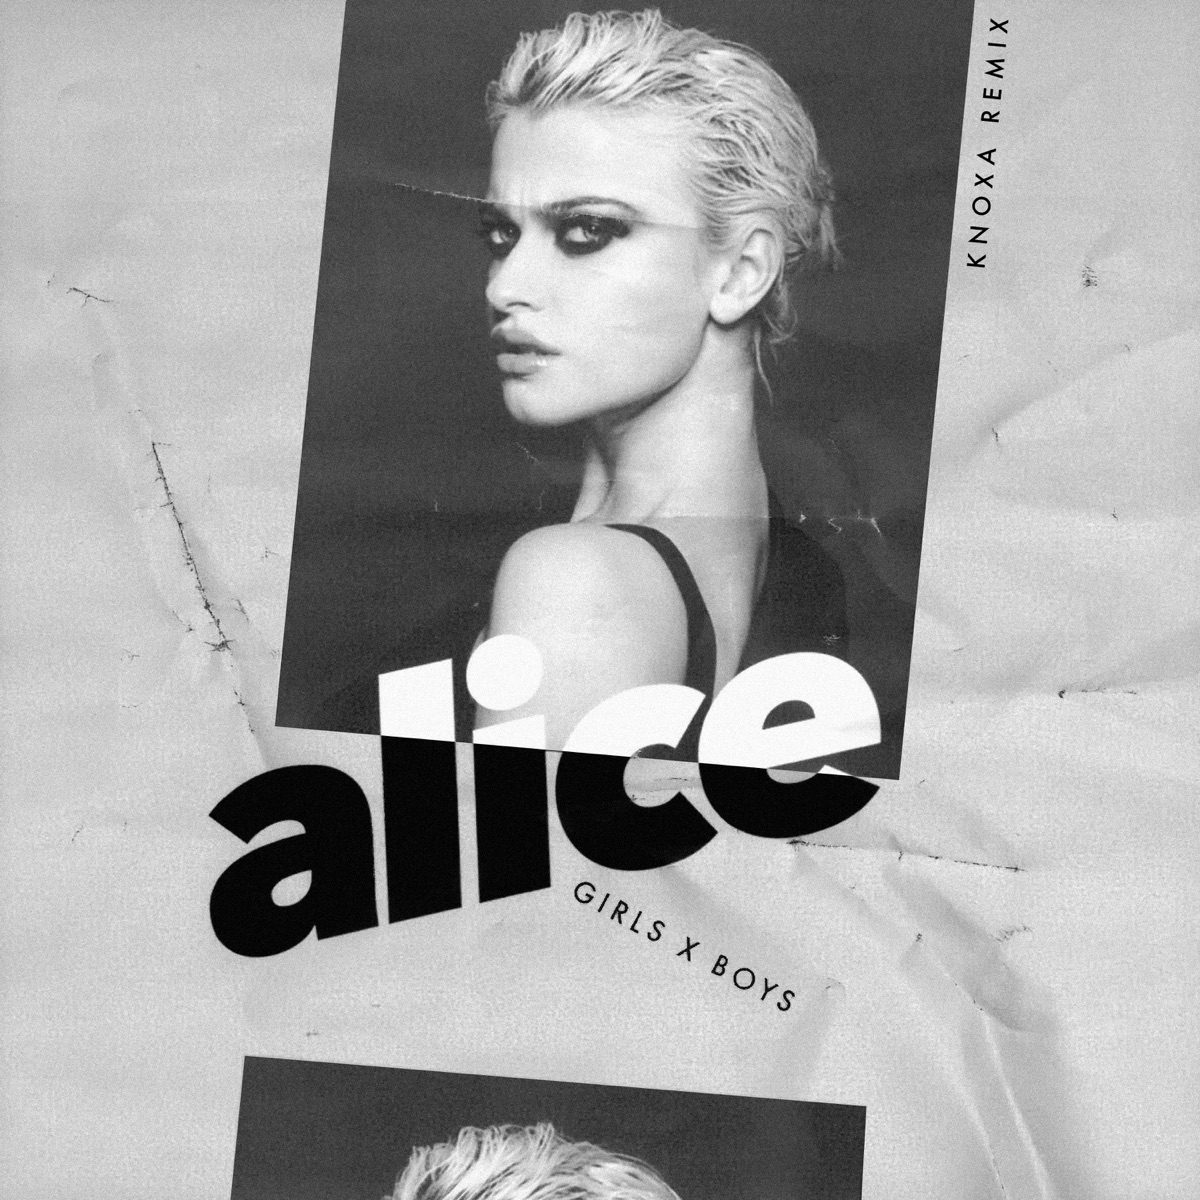 Alice Chater — Girls X Boys (KNOXA Remix) cover artwork